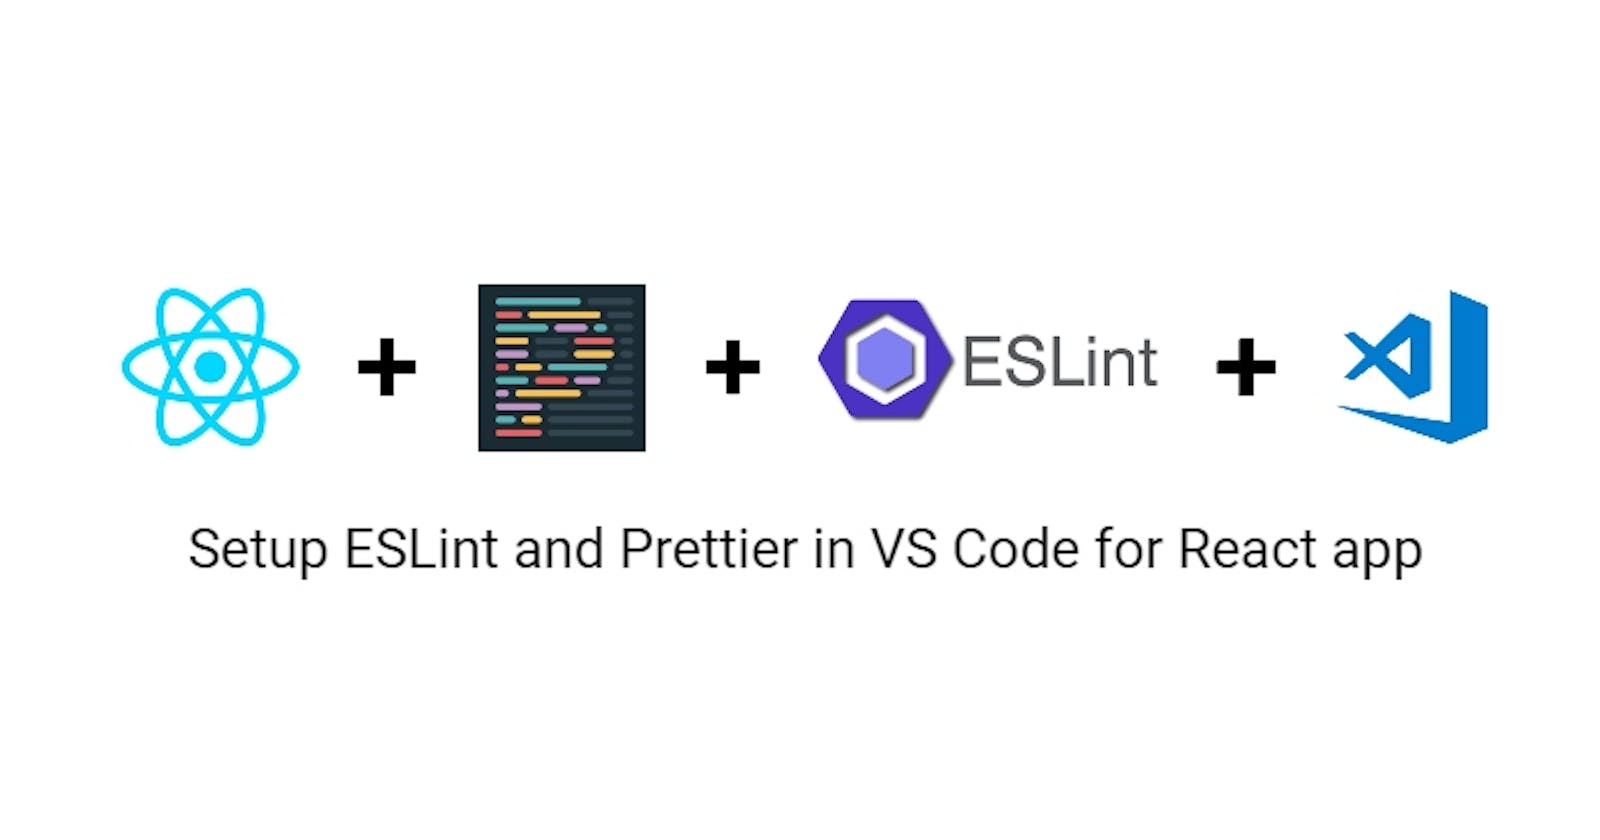 Setup ESLint and Prettier VS Code extensions for React app